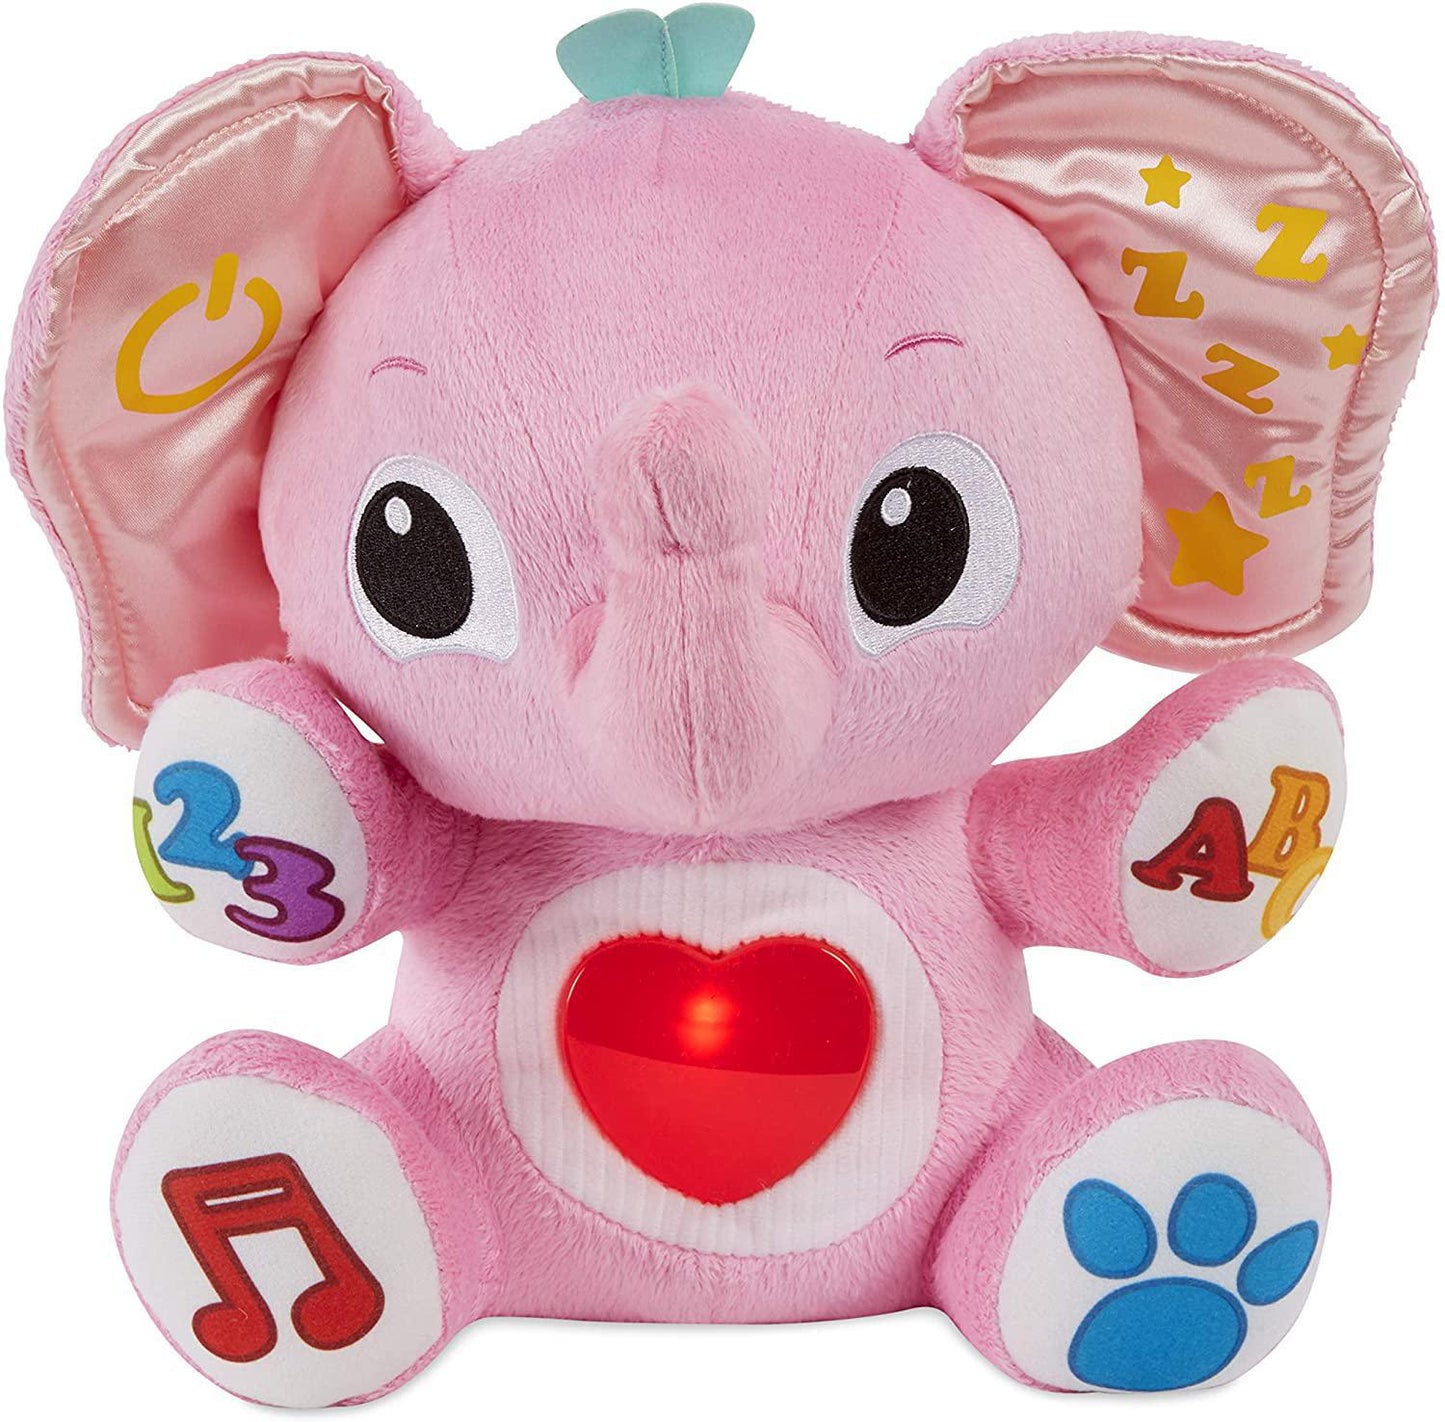 Little Tikes My Buddy-Lalaphant Soft and Cuddly Elephant (240+ sing-along songs)